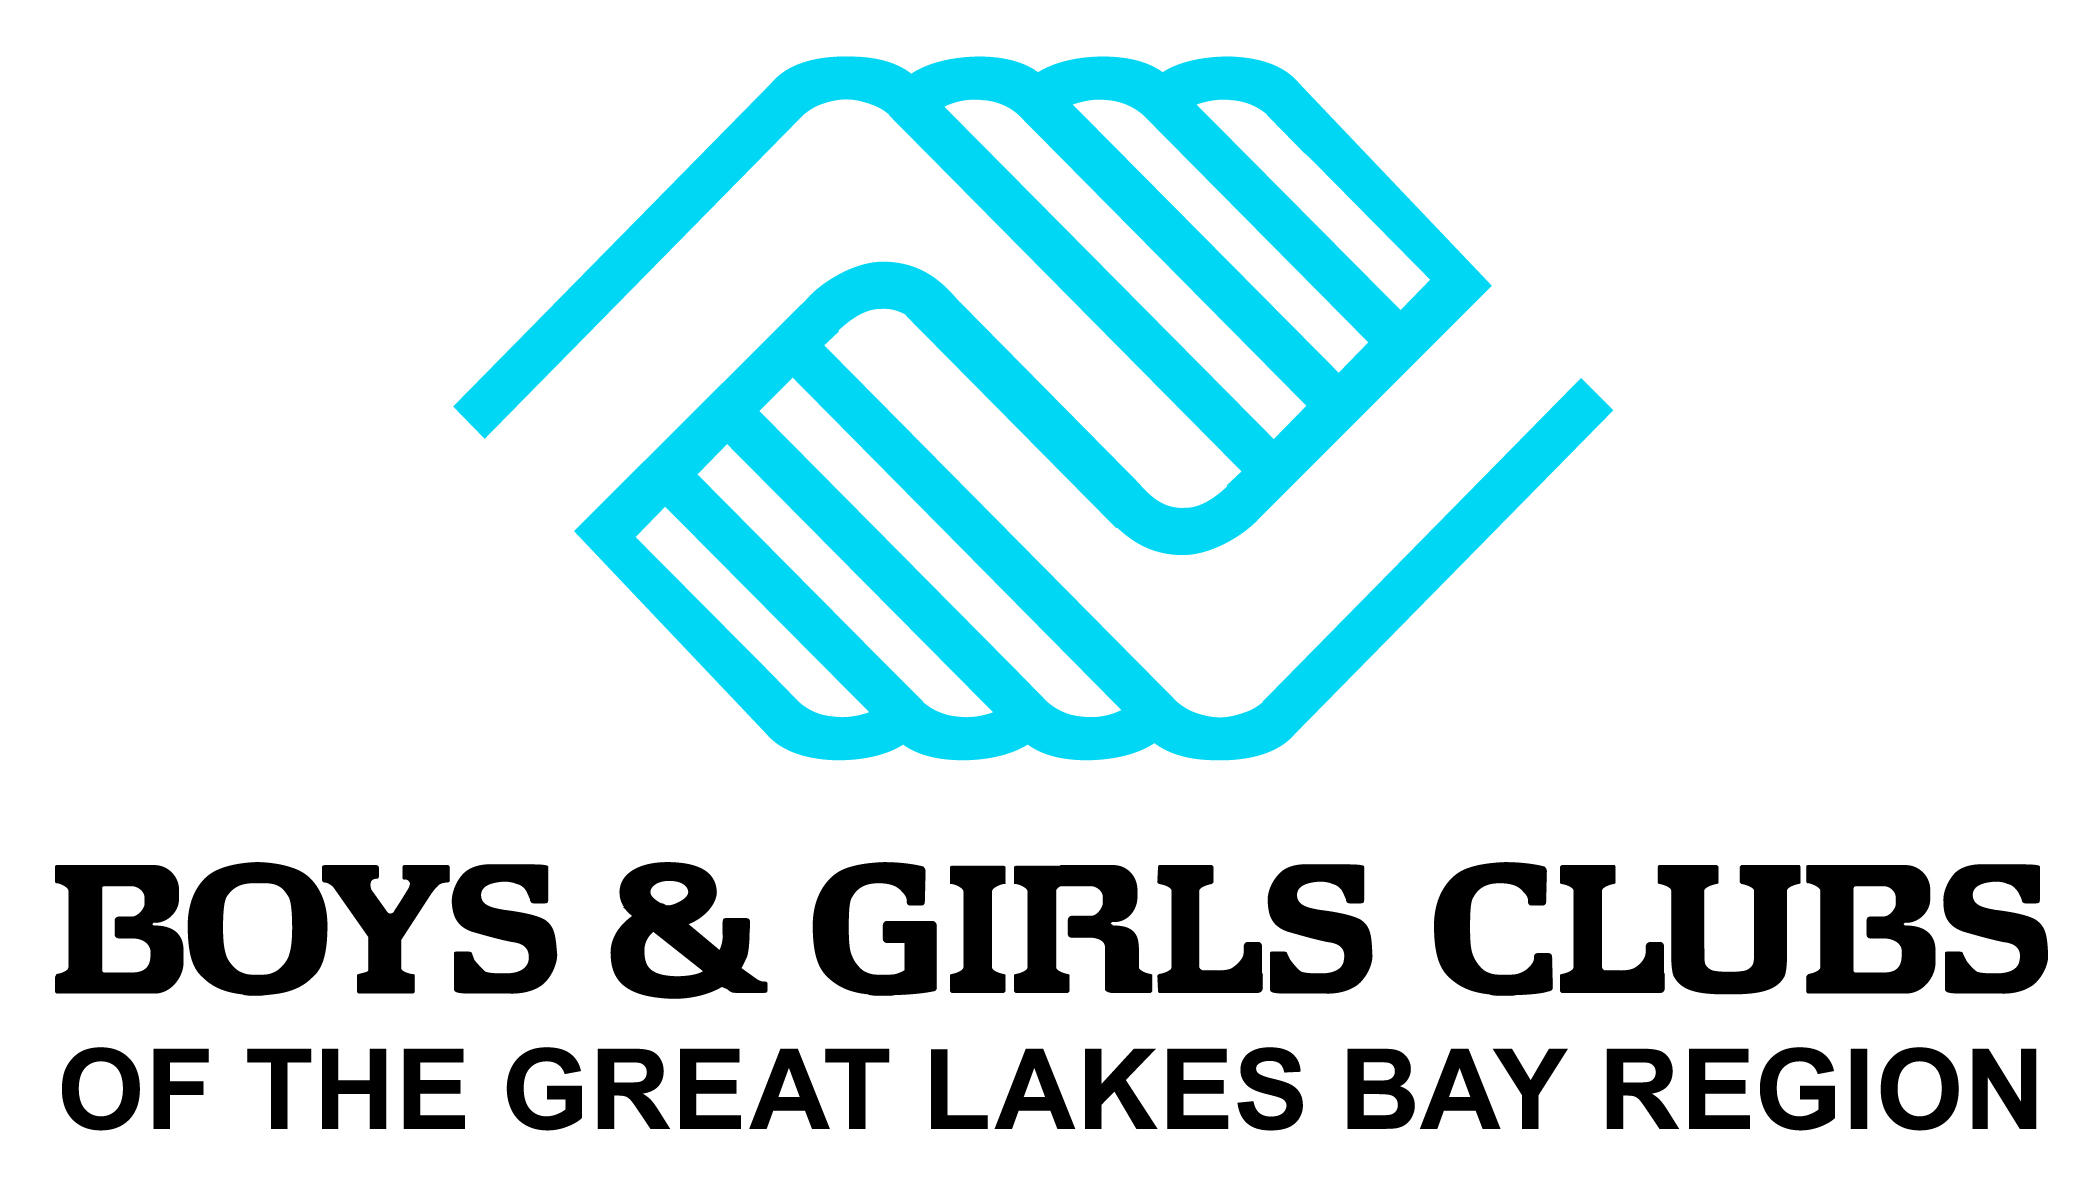 Boys & Girls Clubs of the Great Lakes Bay Region logo